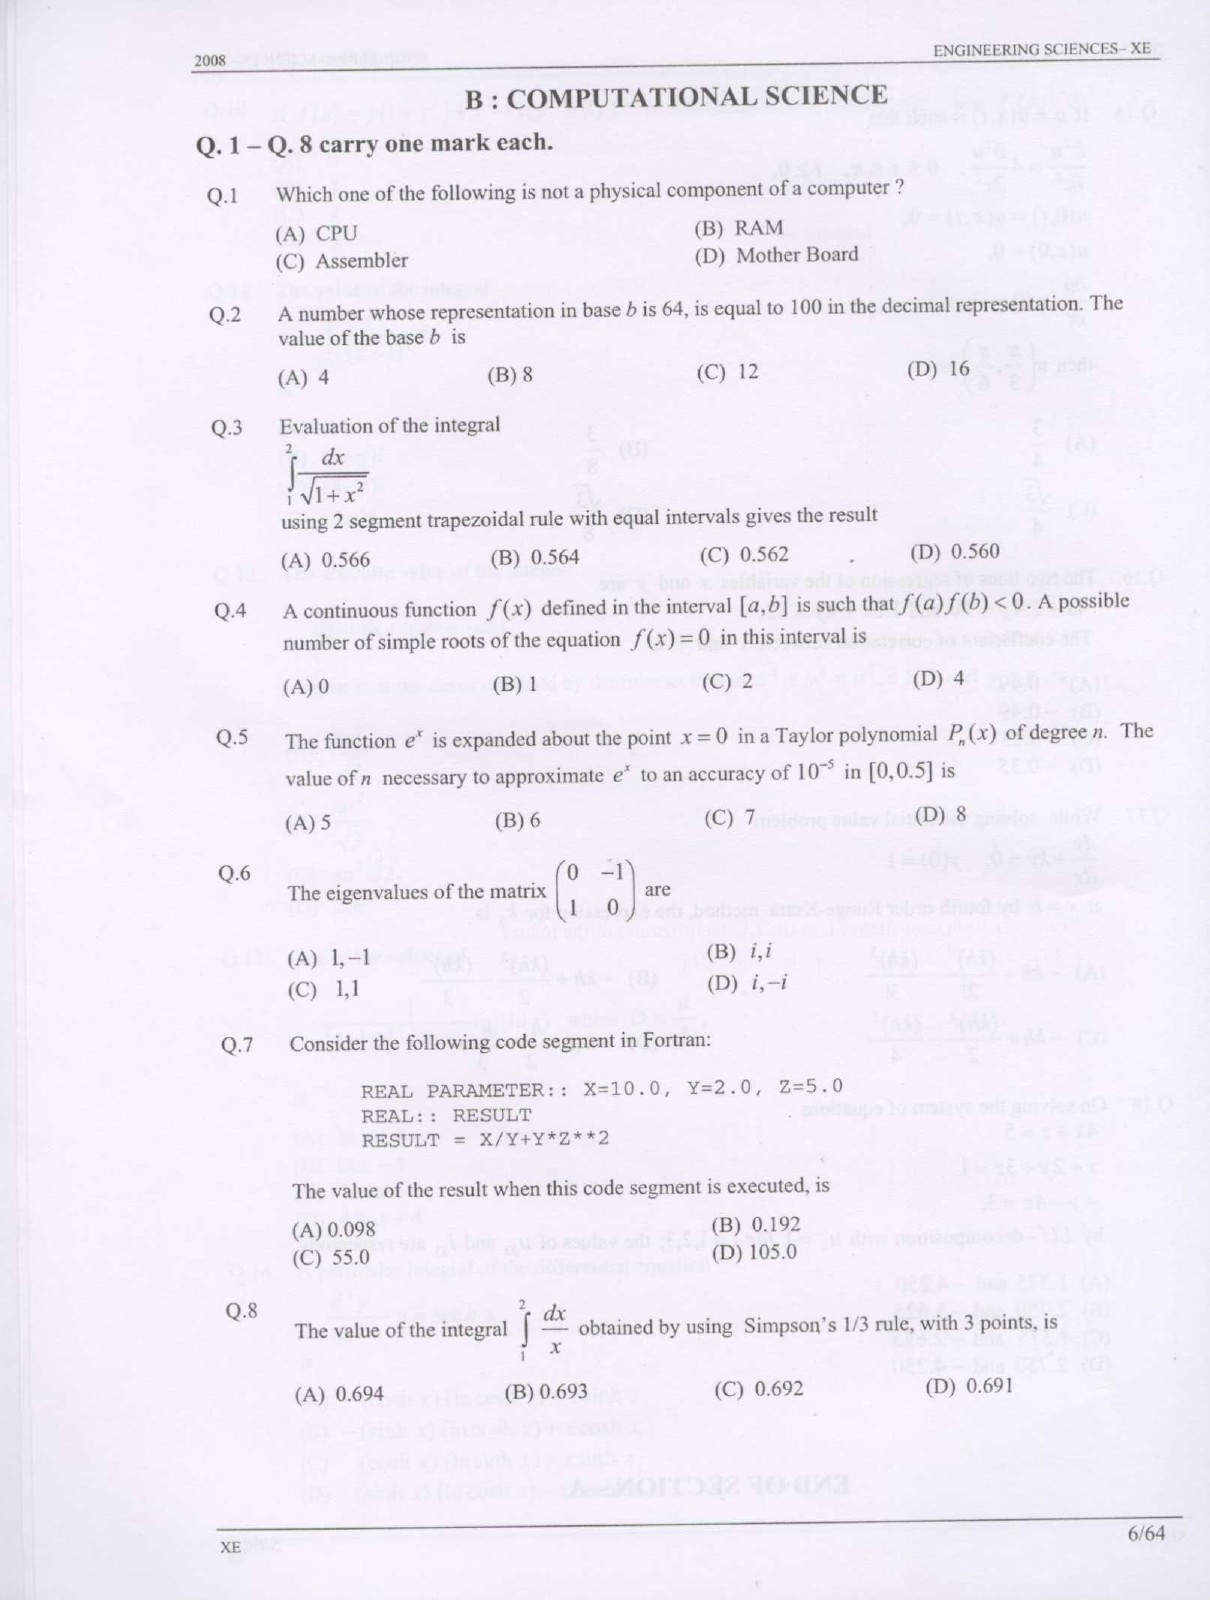 GATE Exam Question Paper 2008 Engineering Sciences 6